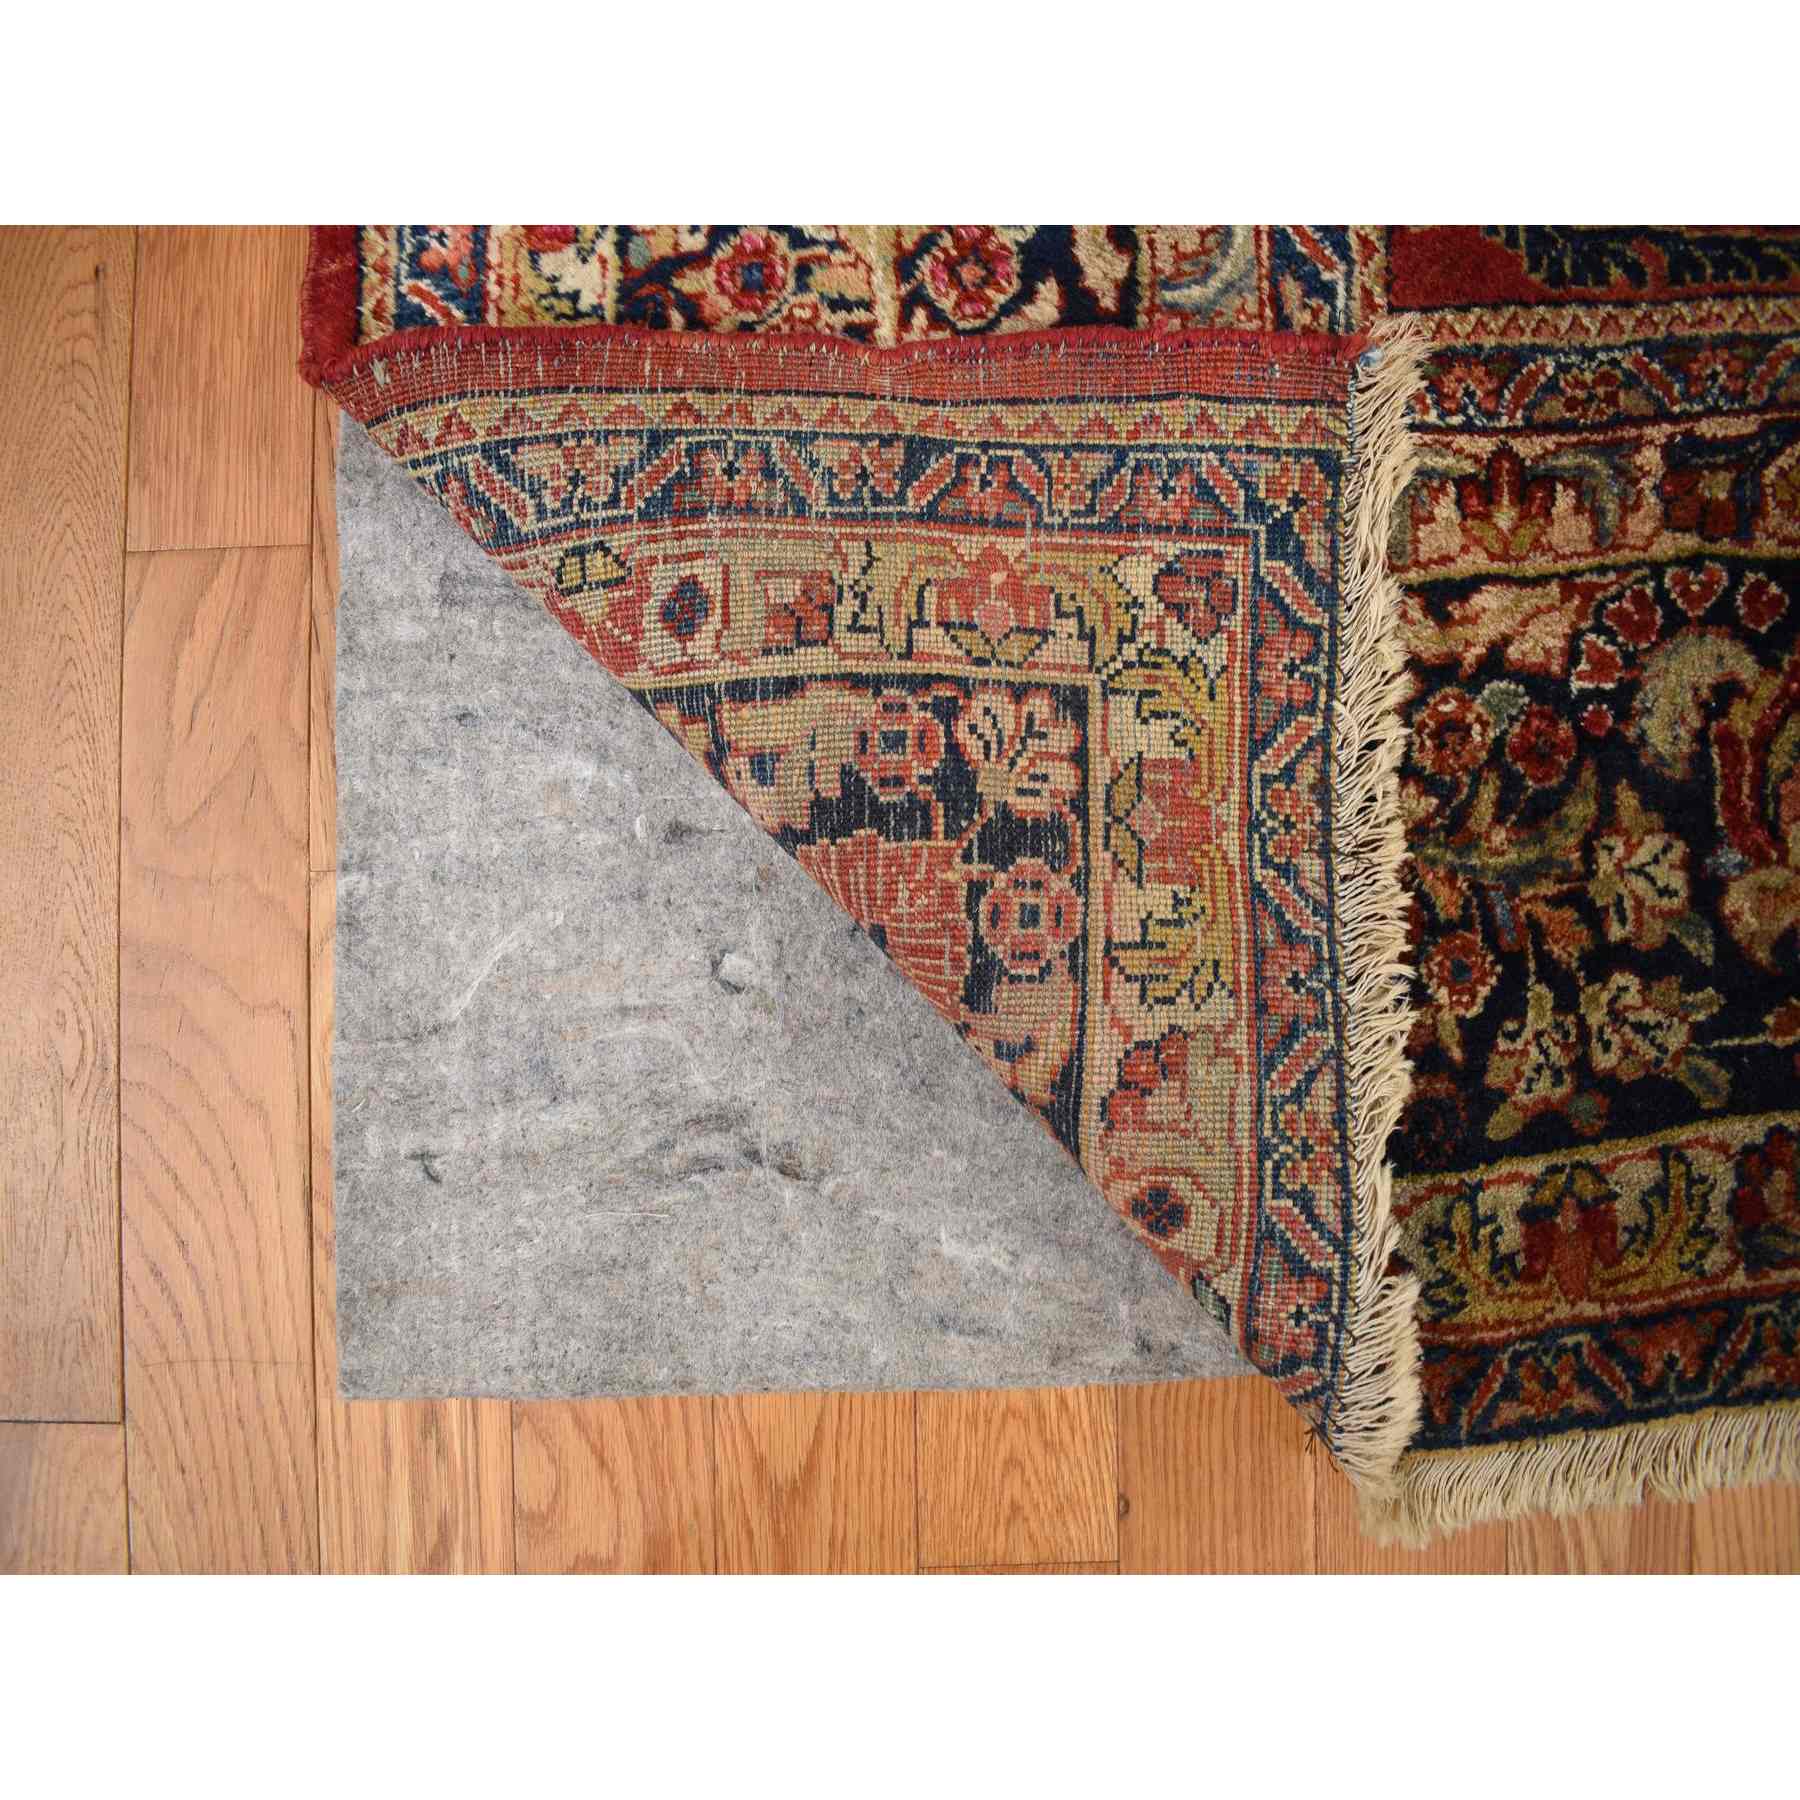 Antique-Hand-Knotted-Rug-390865